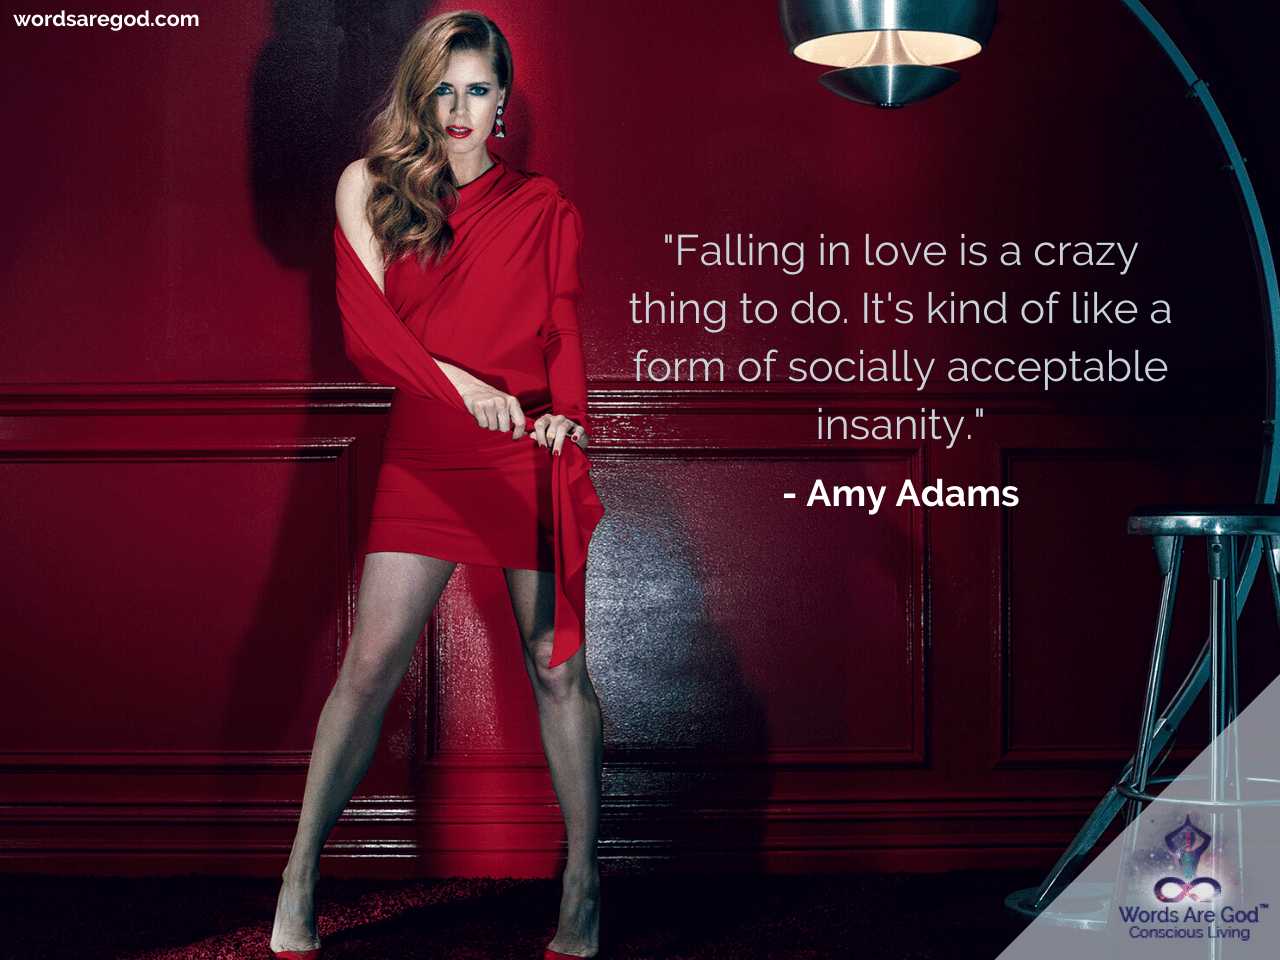 Amy Adams Life Quotes